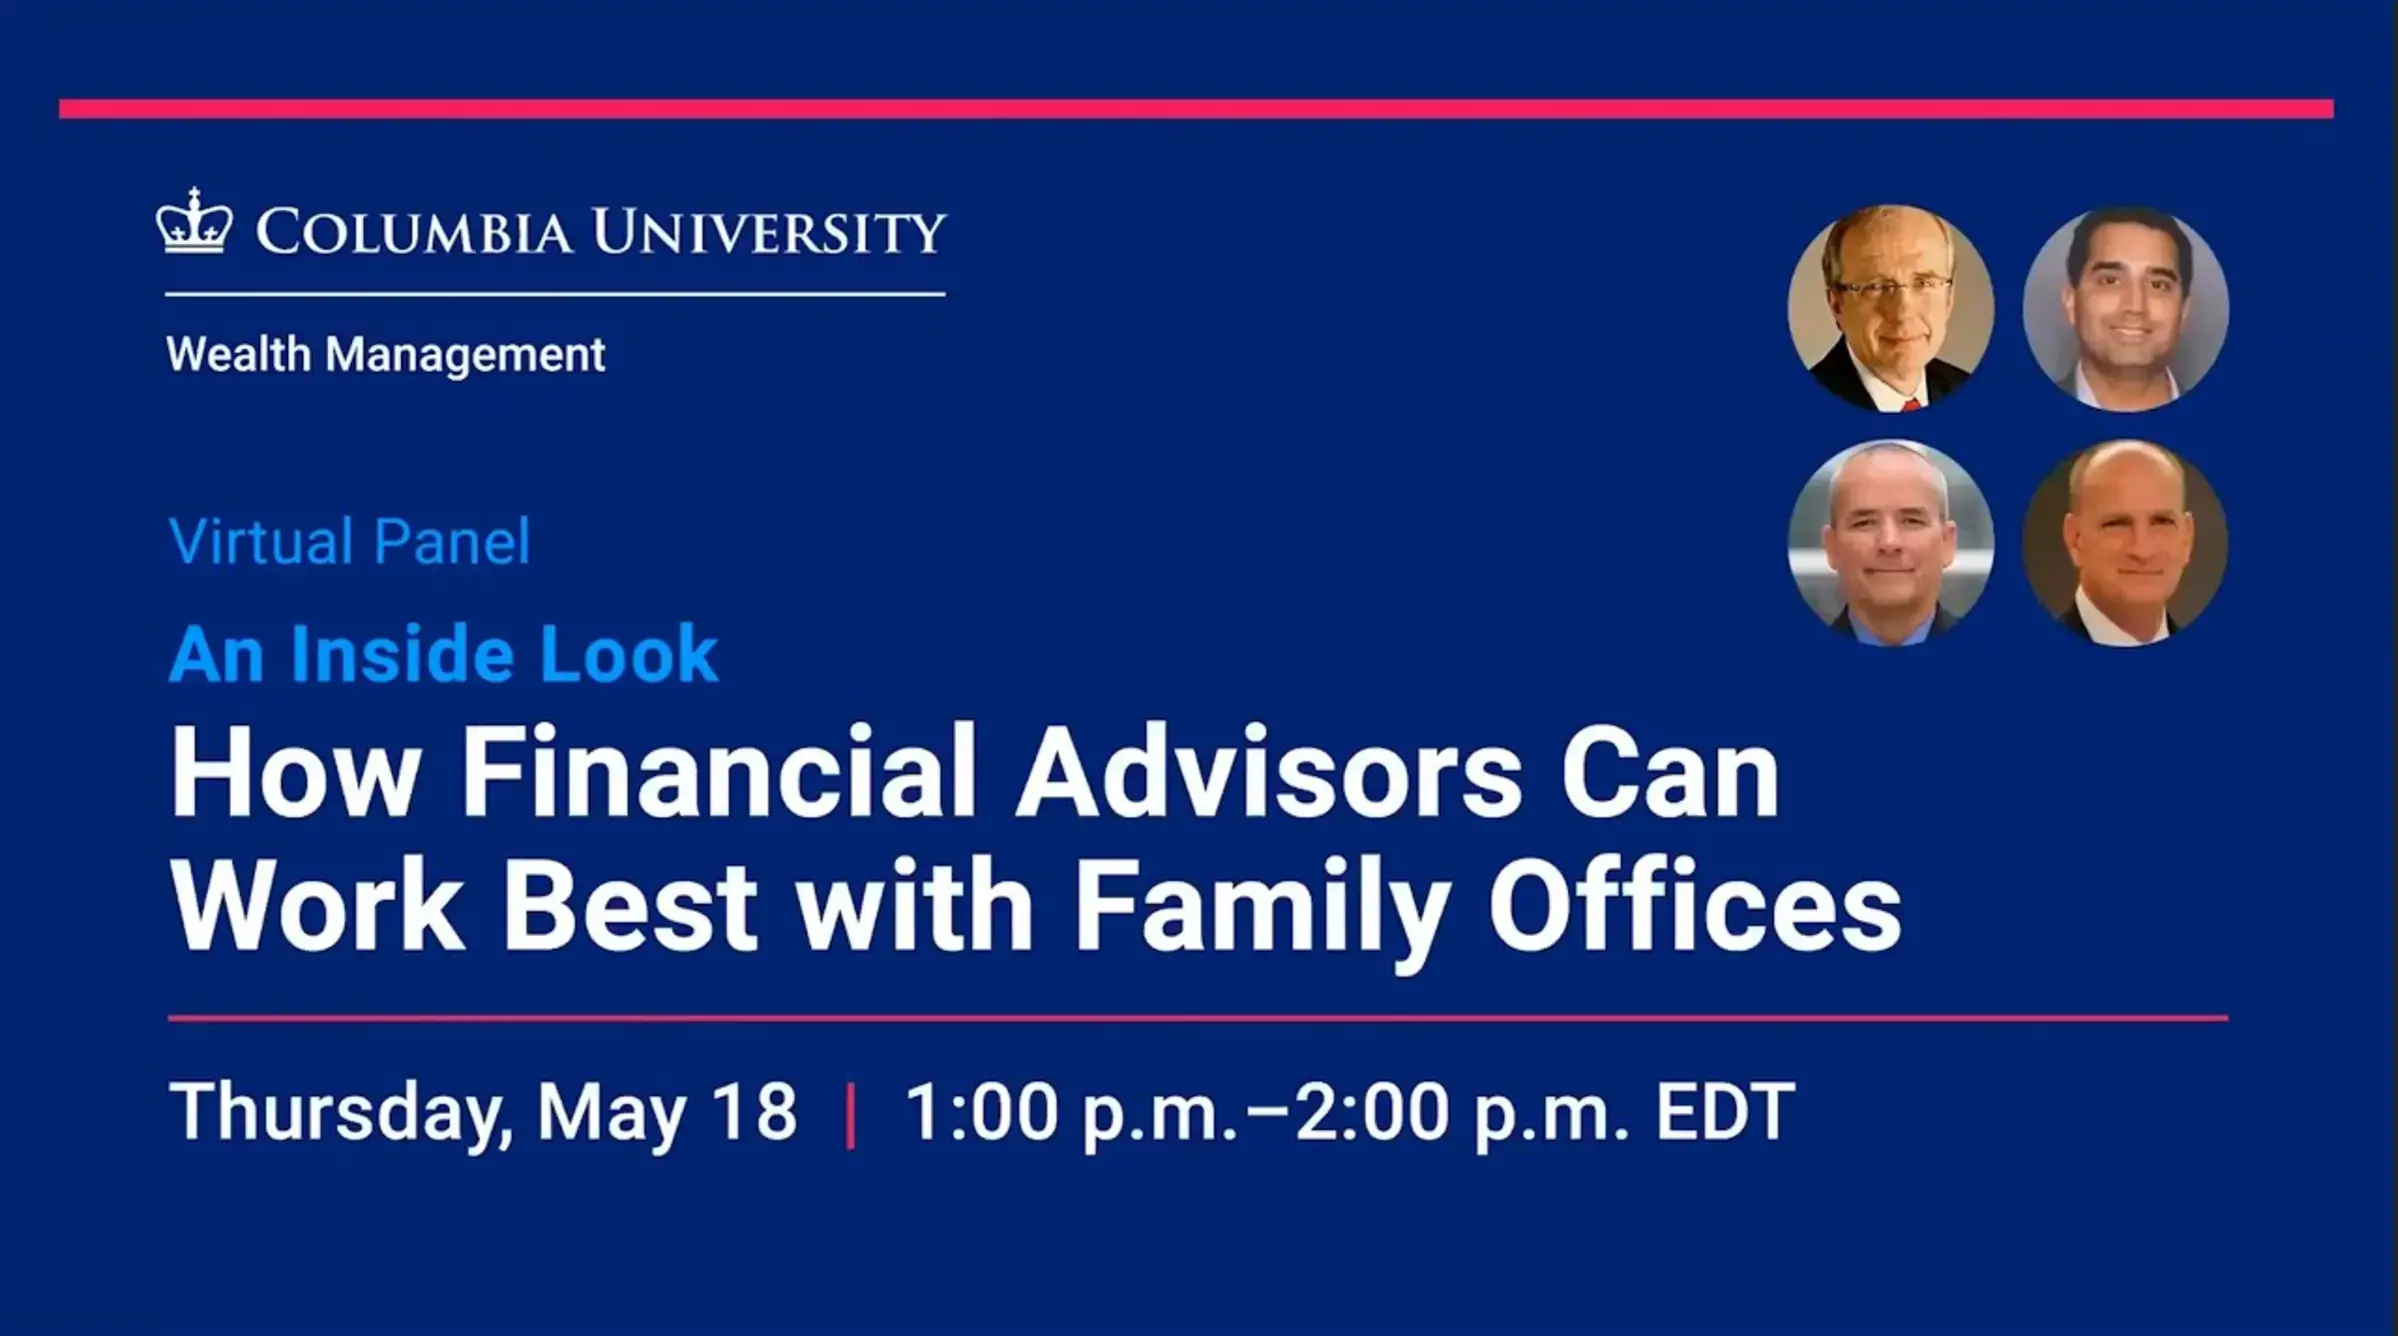 An Inside Look: How Financial Advisors Can Work Best with Family Offices